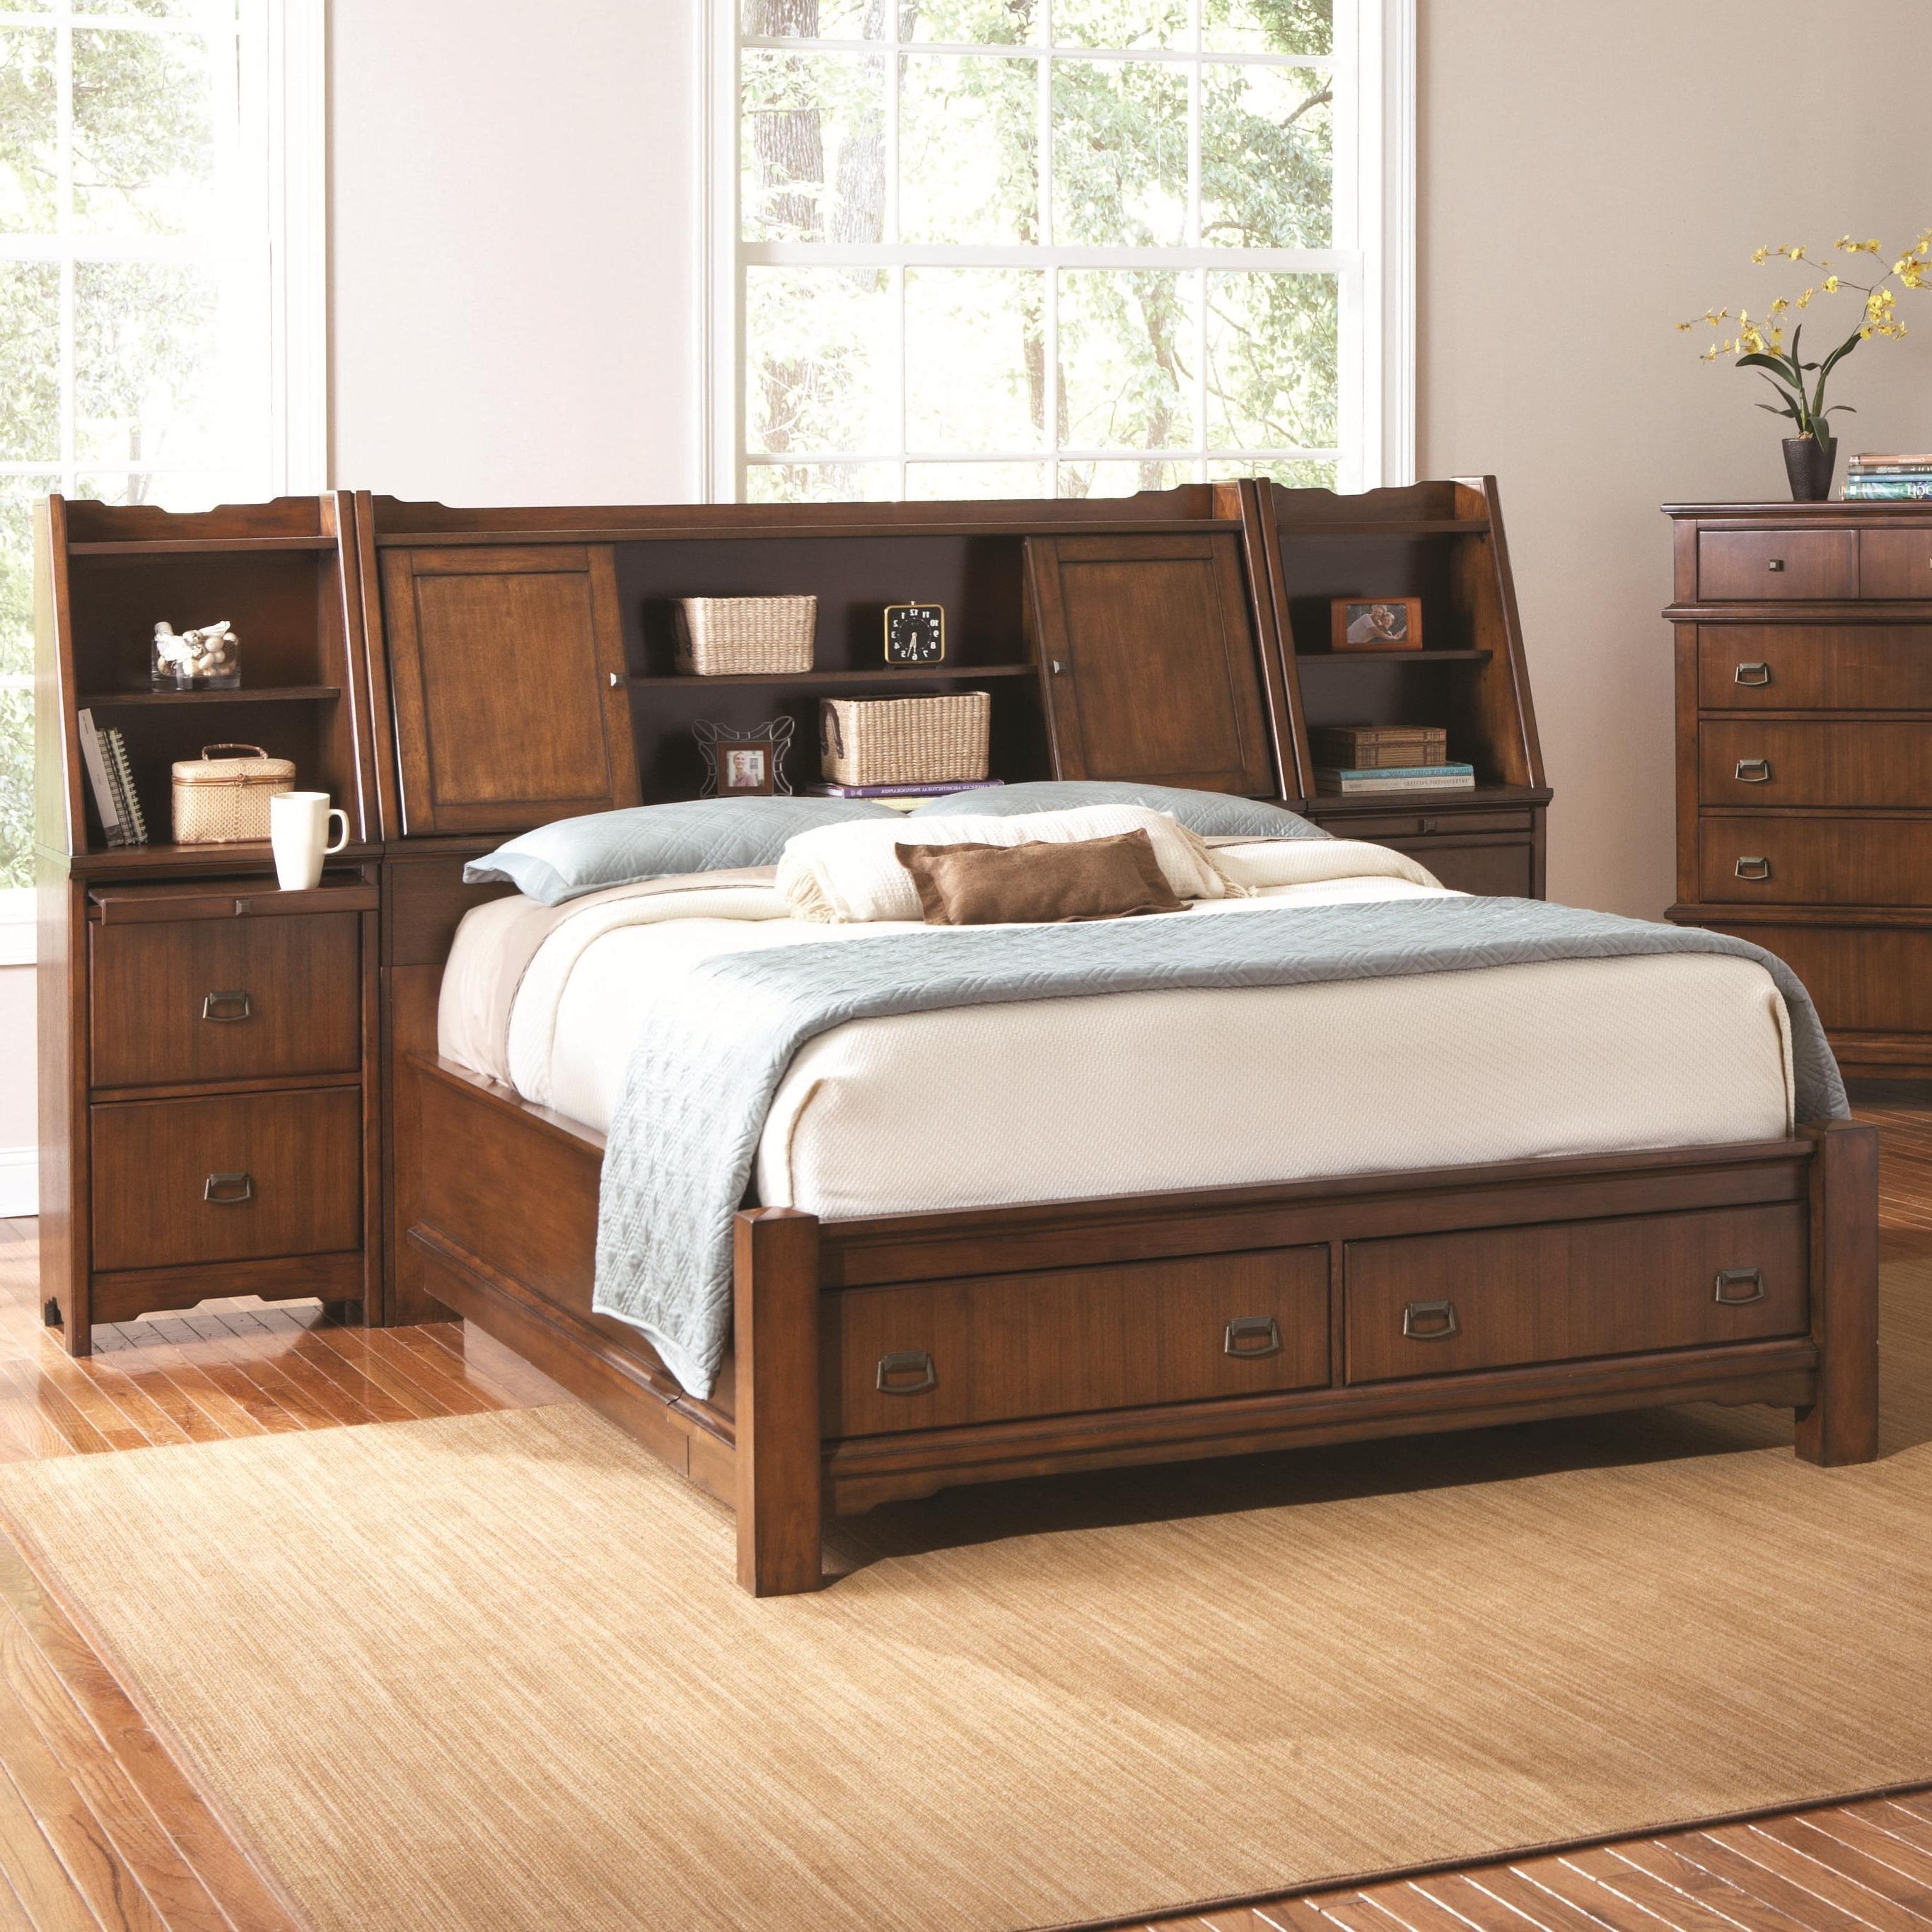 King Size Bookcases Headboard With Well Known Bed Frames : Modern Dark Brown Wooden Storage Frame With Lighted (View 10 of 15)